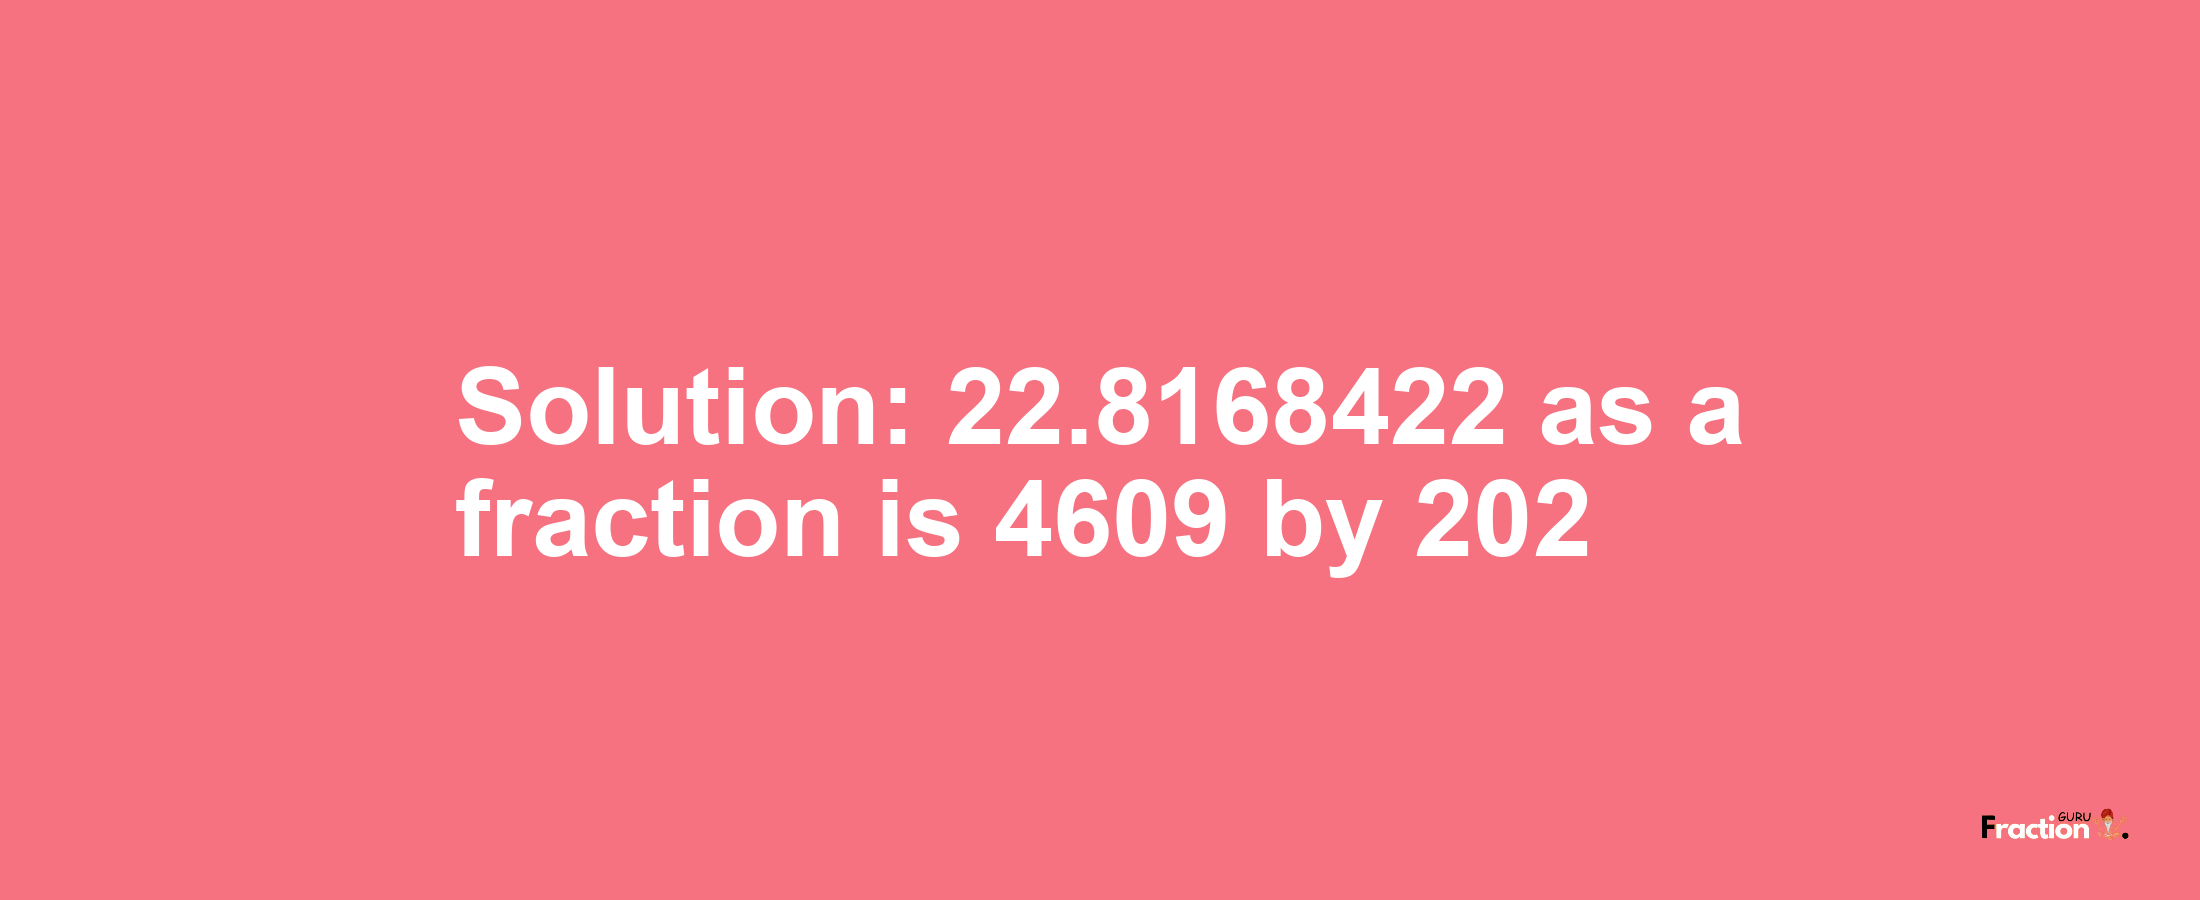 Solution:22.8168422 as a fraction is 4609/202